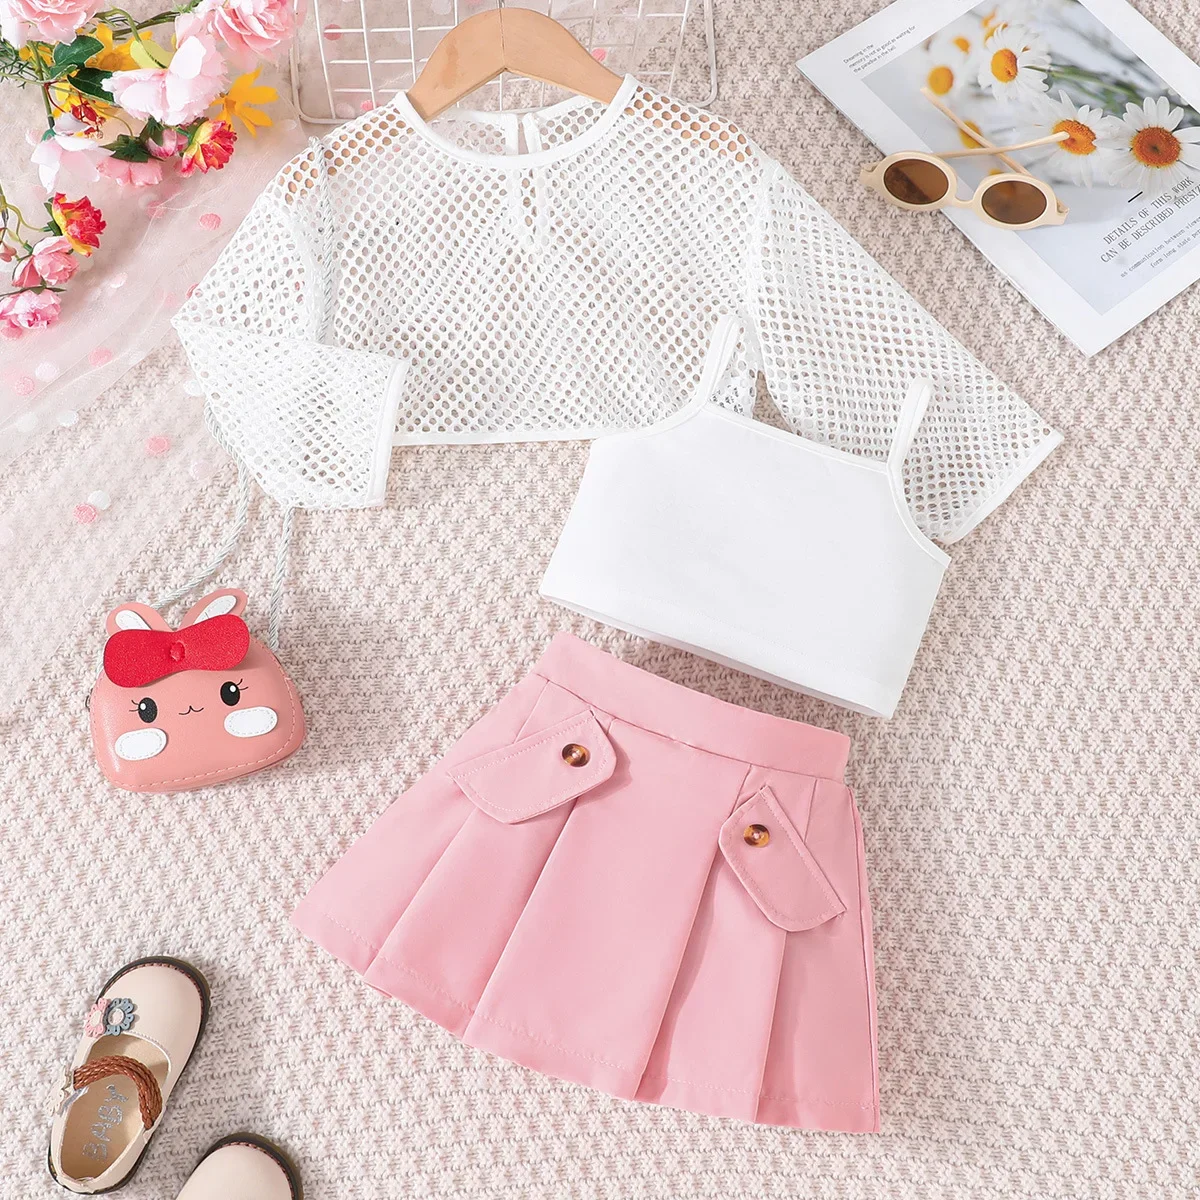 Summer New Girls Clothing Sets Long Sleeve Hollow Out T-shirt + Solid White Crop Tops + Pleated Skirt Children's Casual Clothes